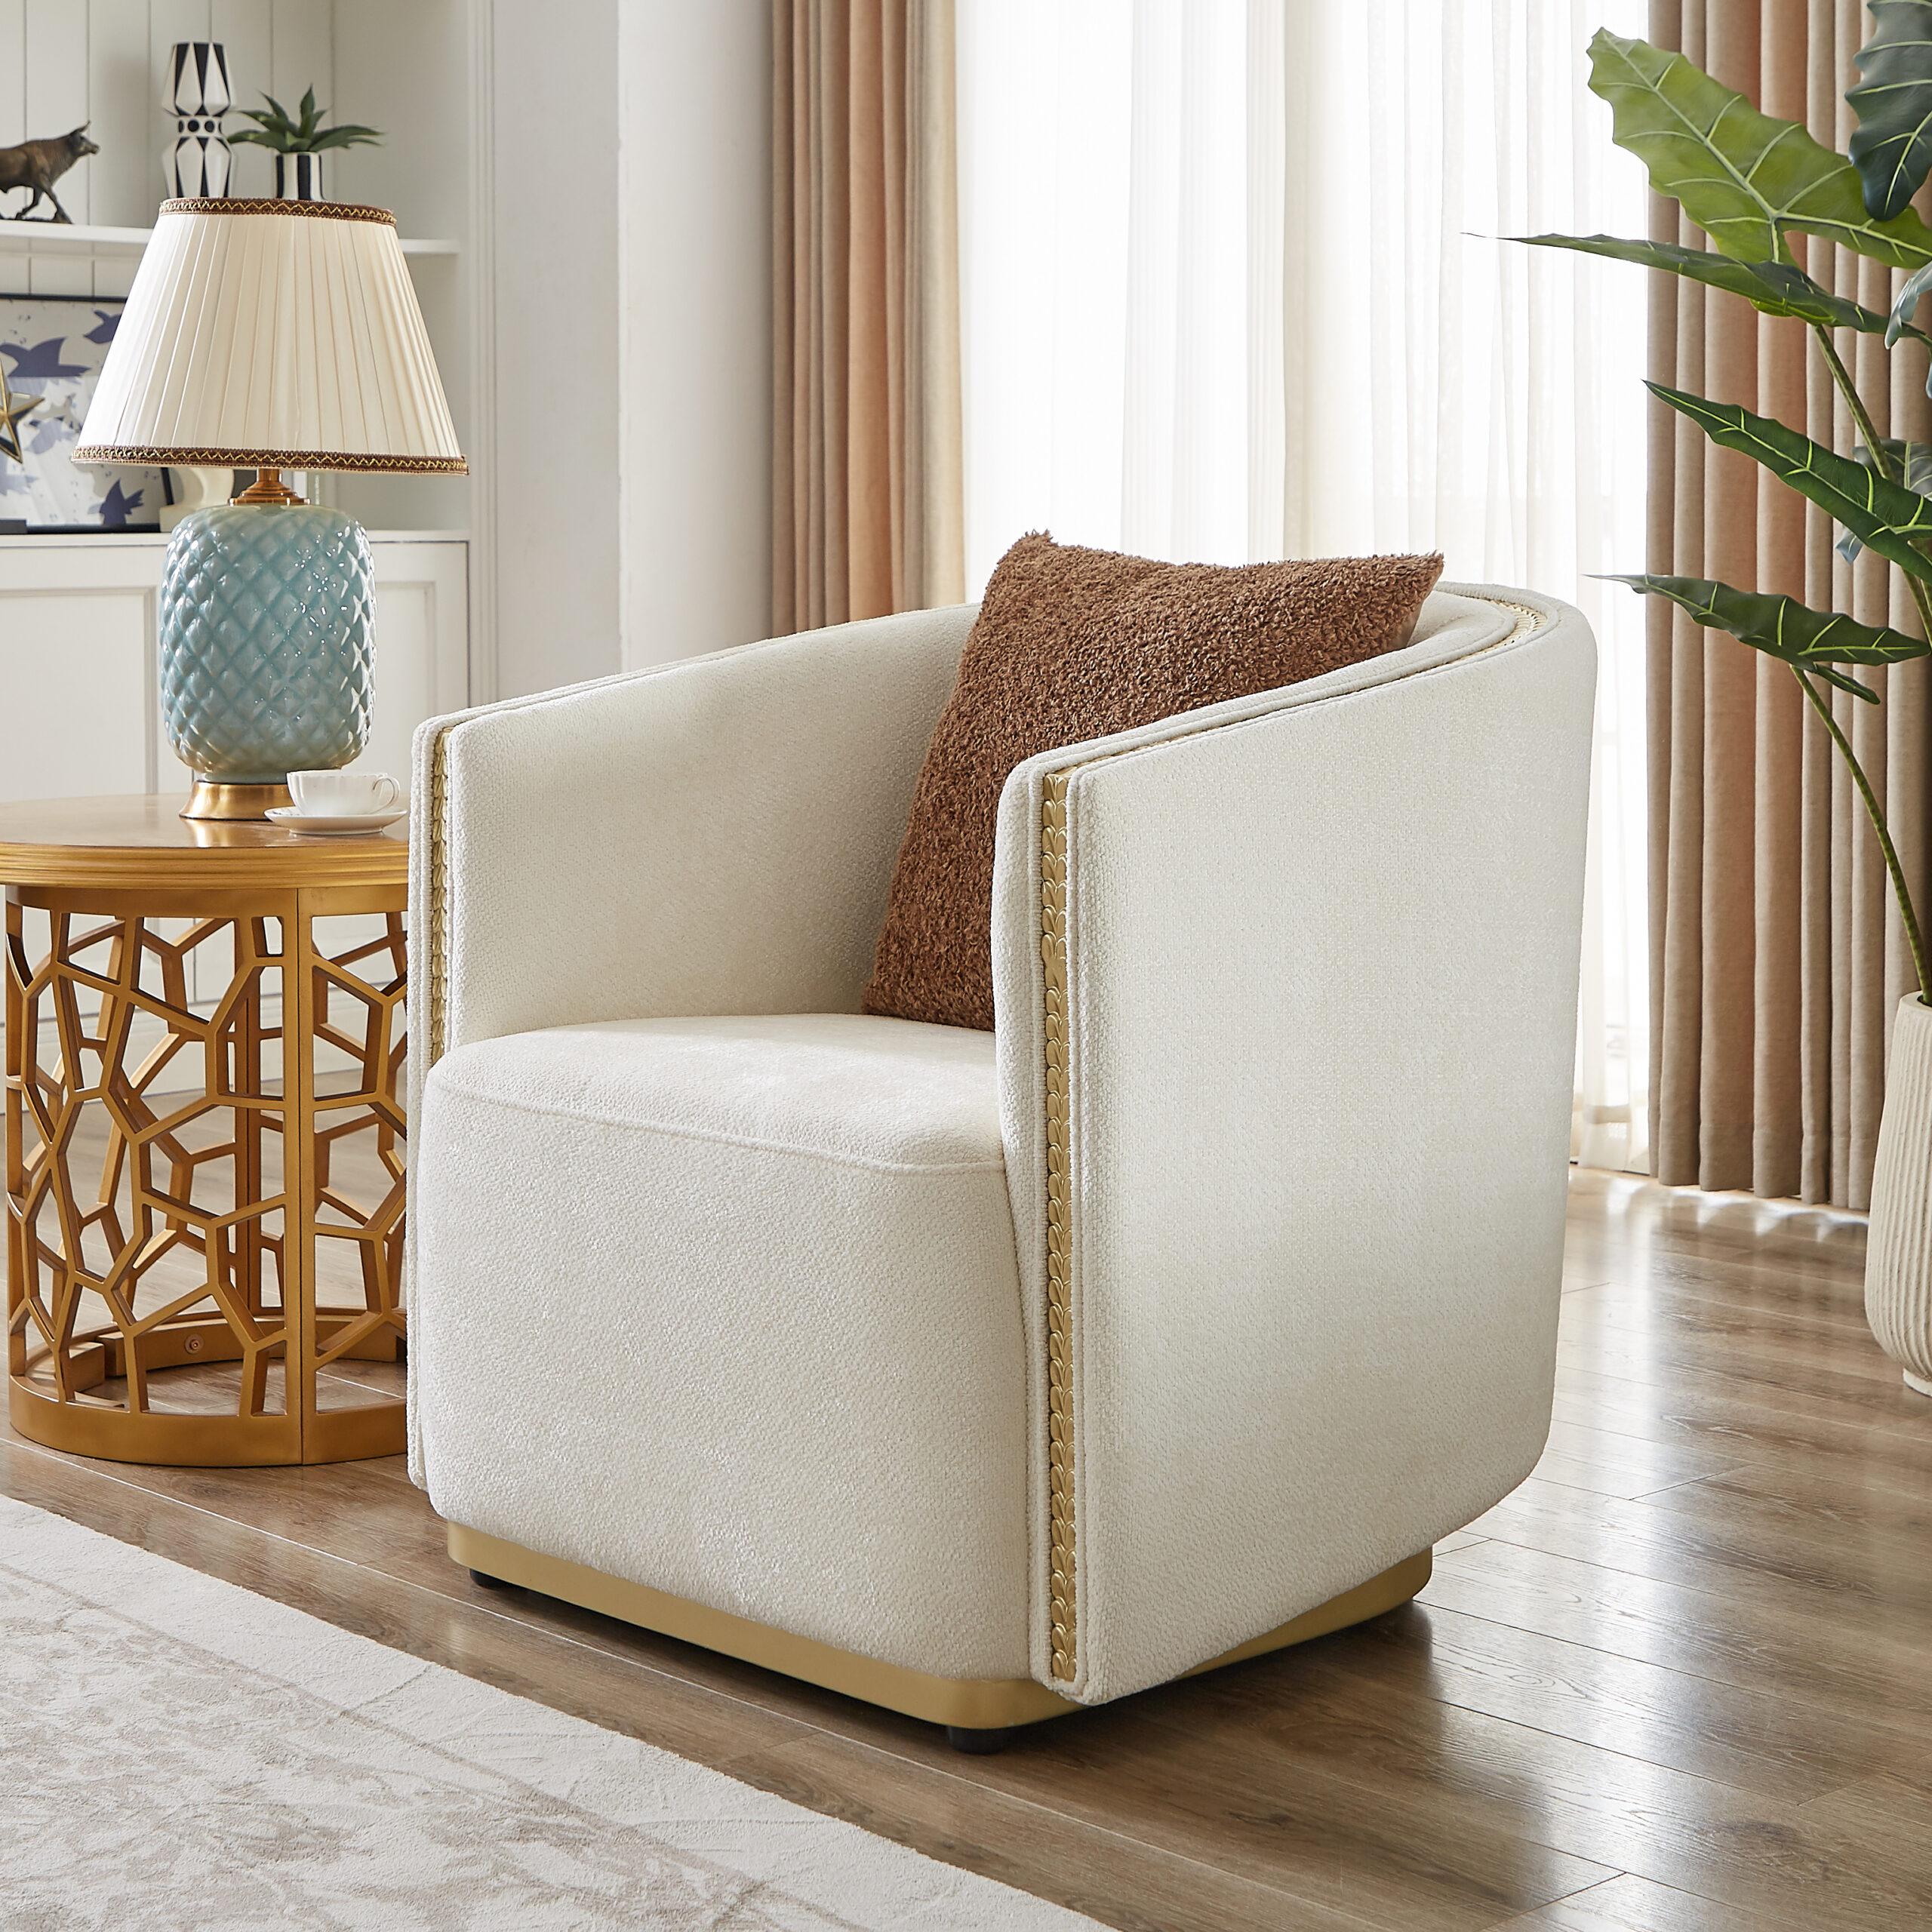 Classic, Traditional Chair HD-9039 Chair HD-C9039 HD-C9039 in White, Gold Fabric